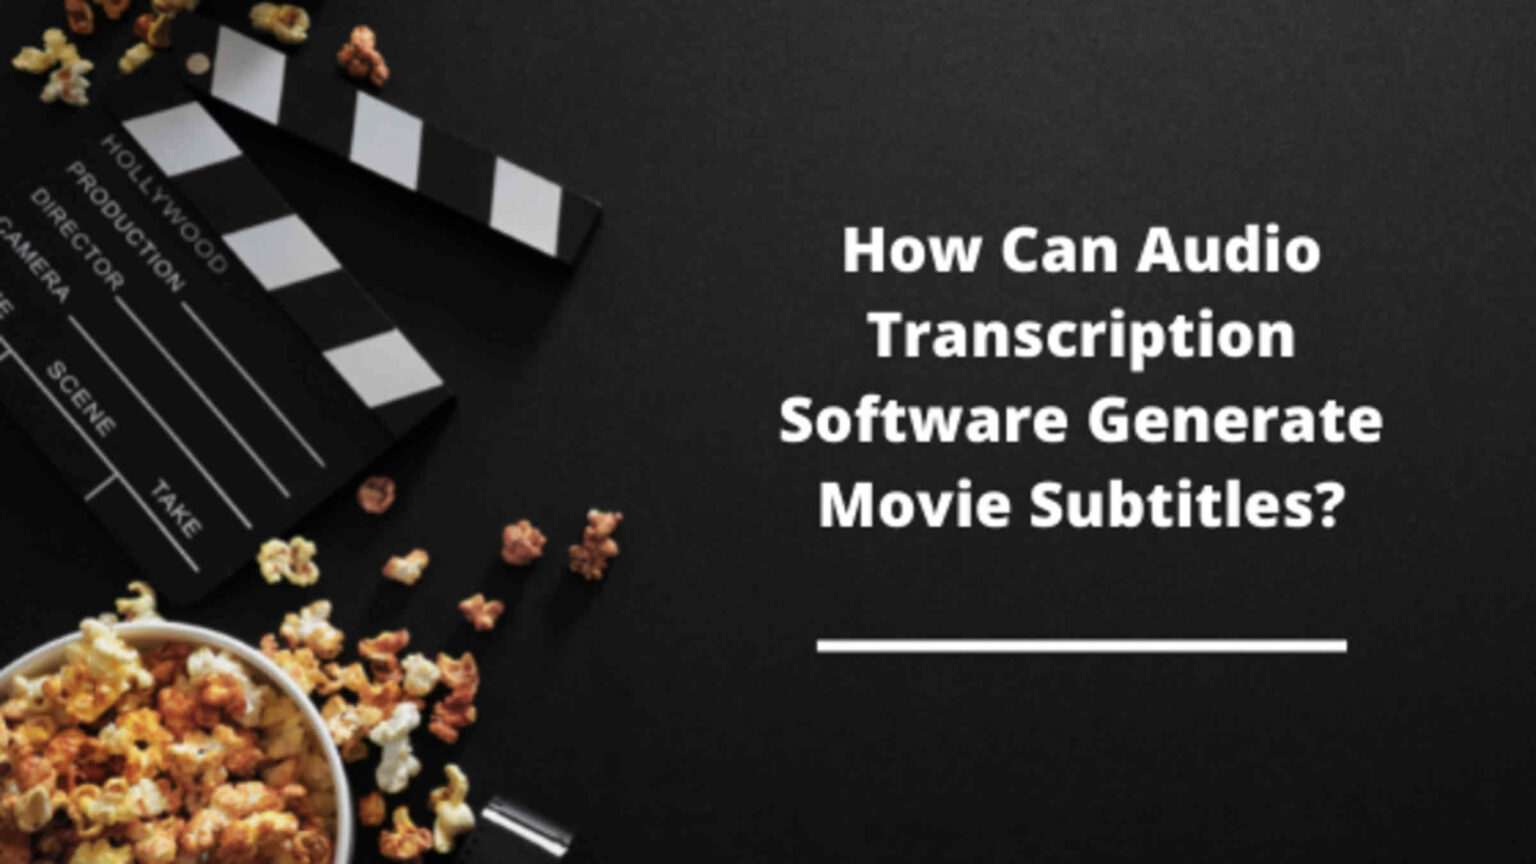 Watching a movie without subtitles can feel incomplete. Ever wonder how to easily get subtitles for your movie? The answer lies in audio transcription software. Read on to find out more.